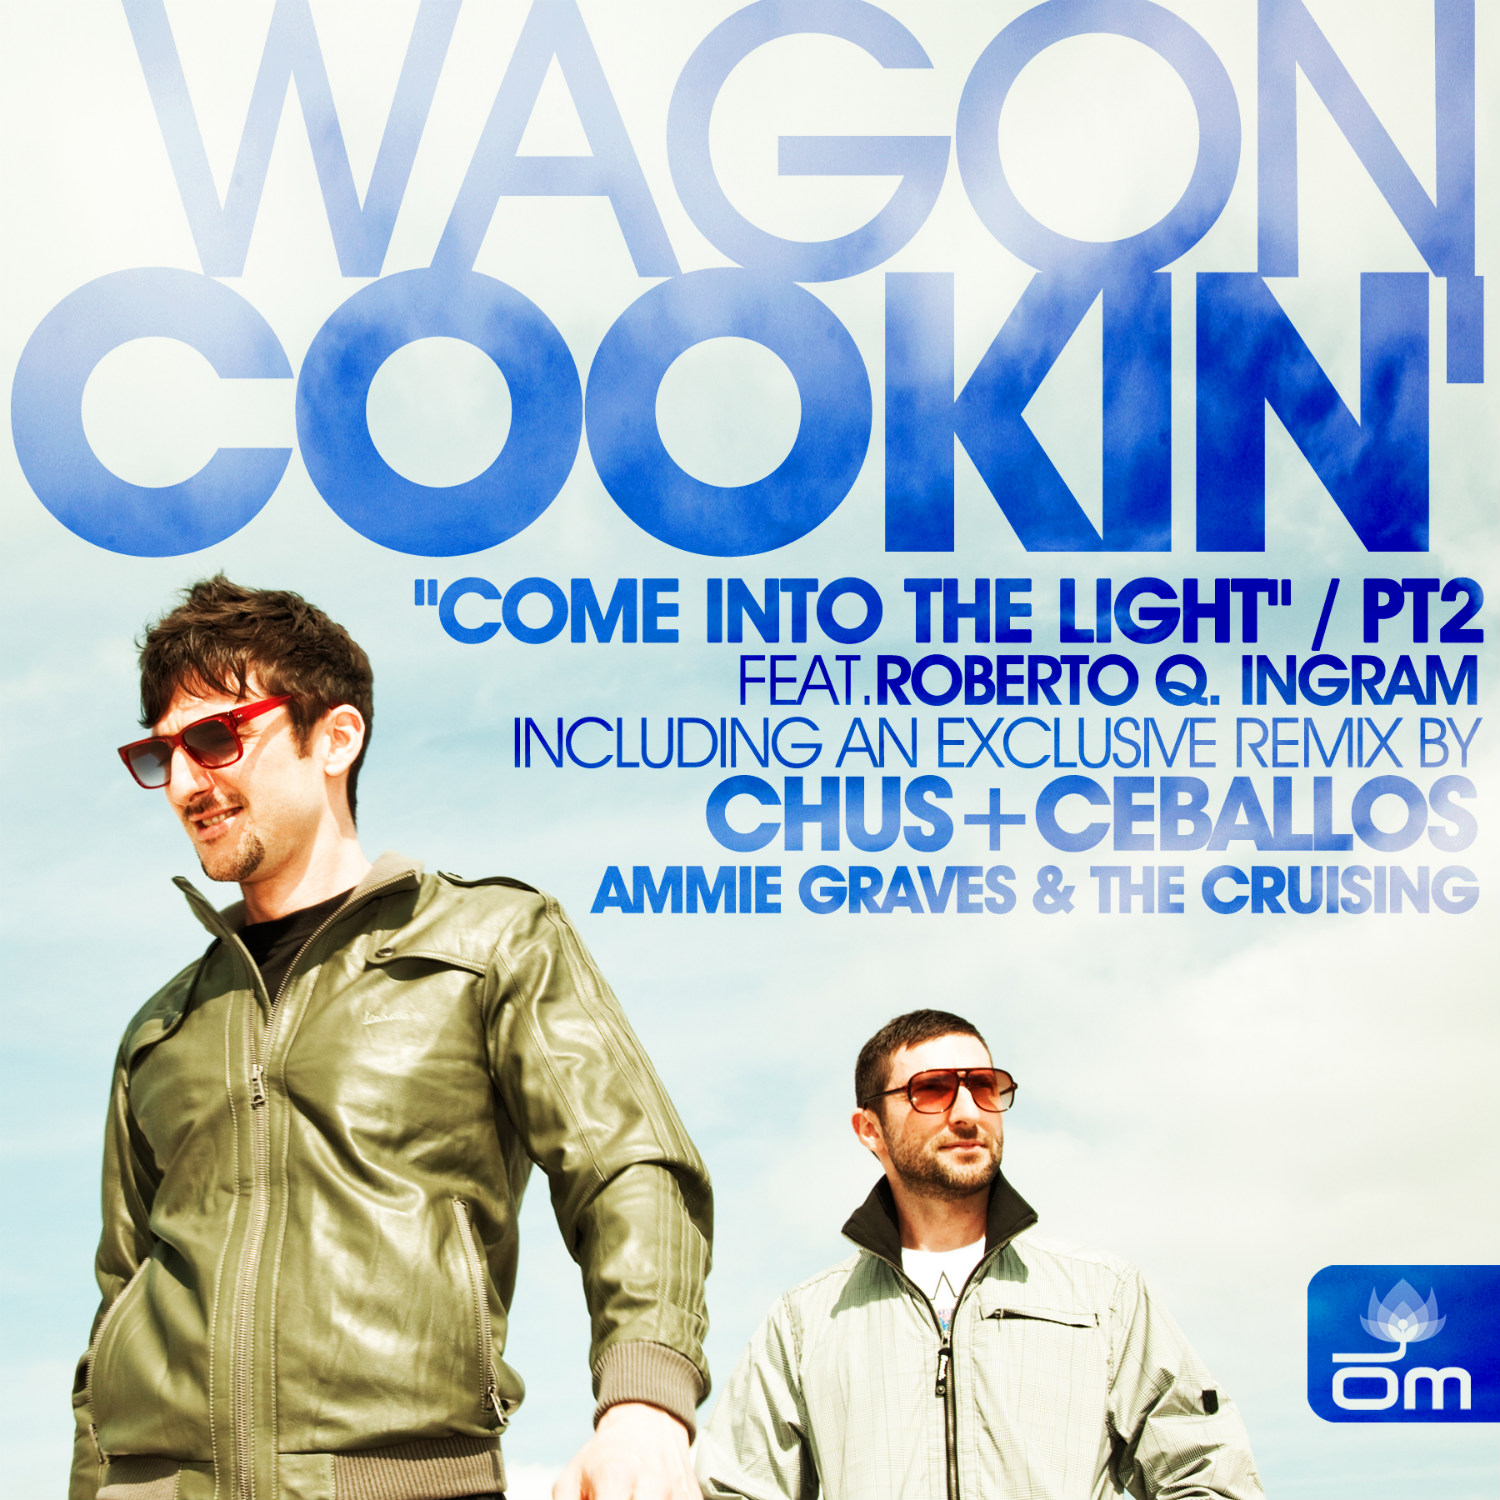 Wagon Cookin' - Come Into The Light